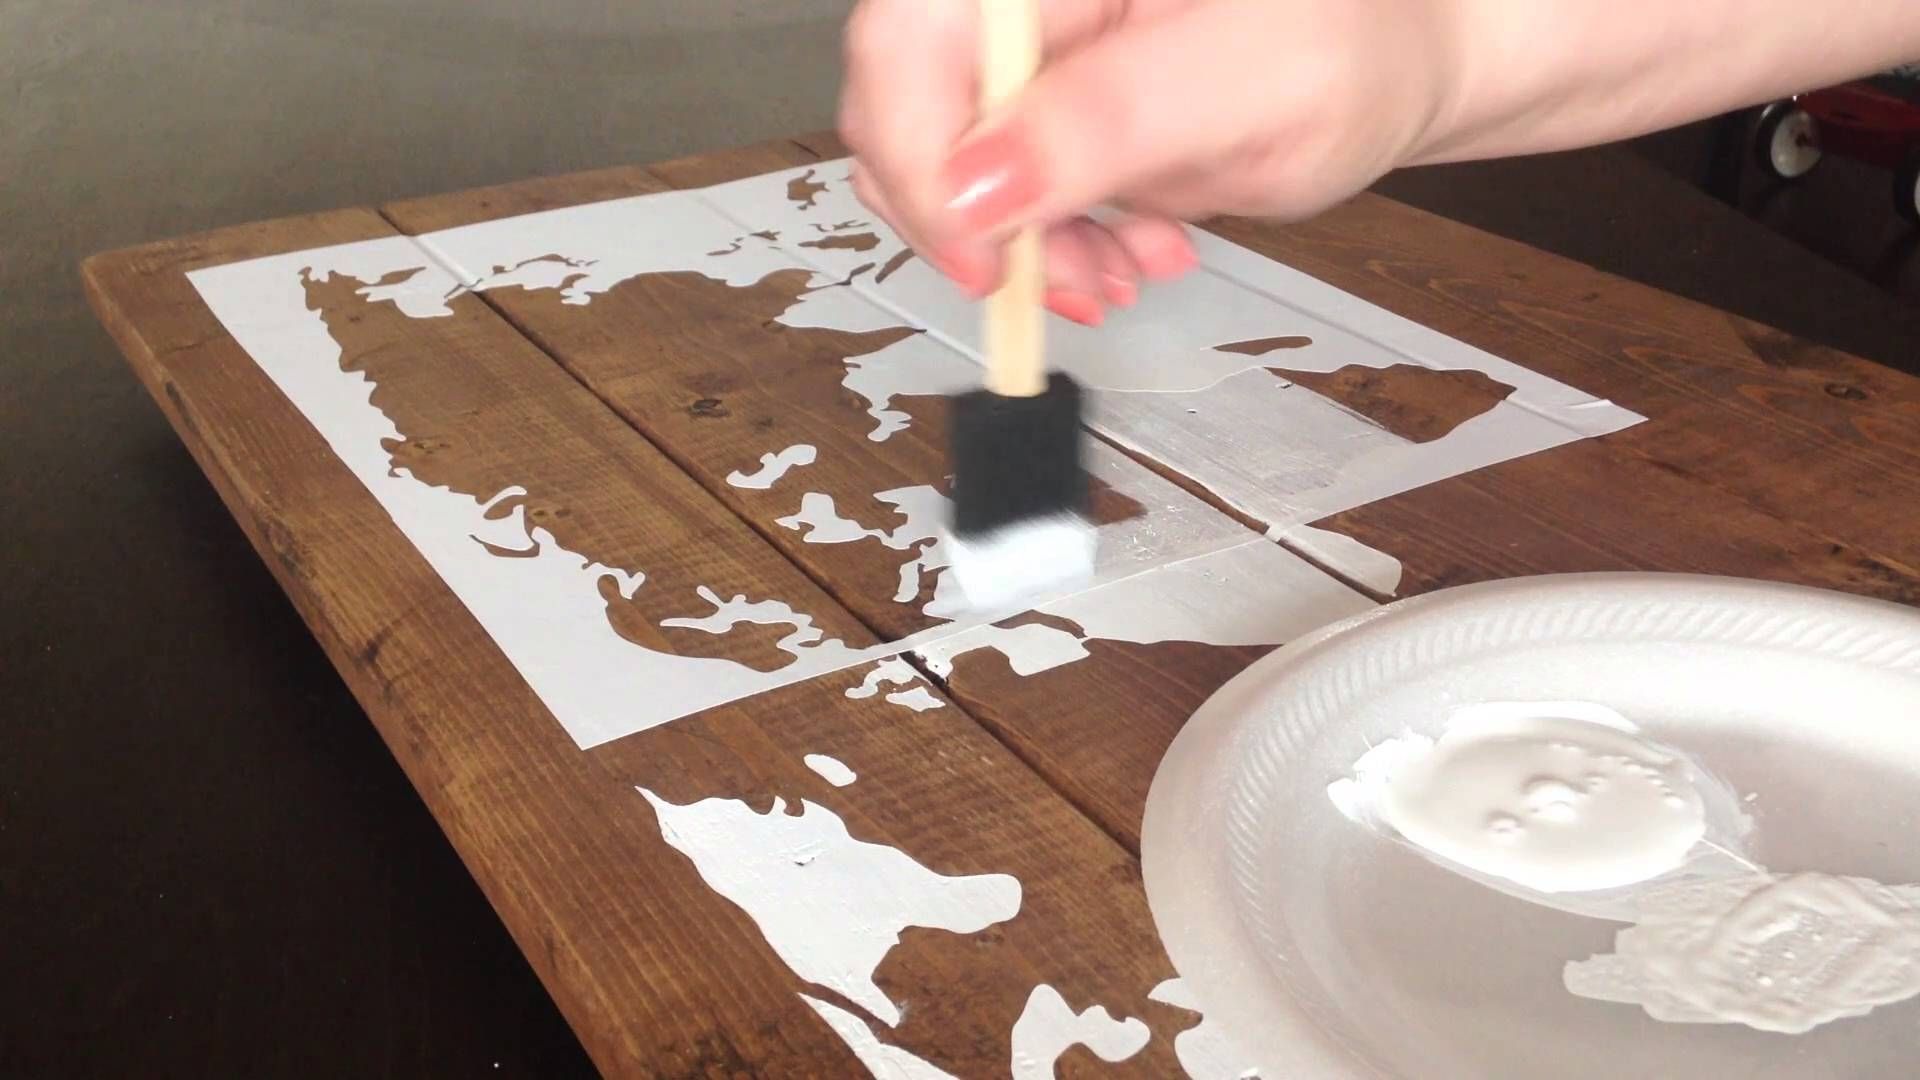 World Map Diy Wood Creations Kit – Youtube For Diy World Map Wall Art (View 10 of 20)